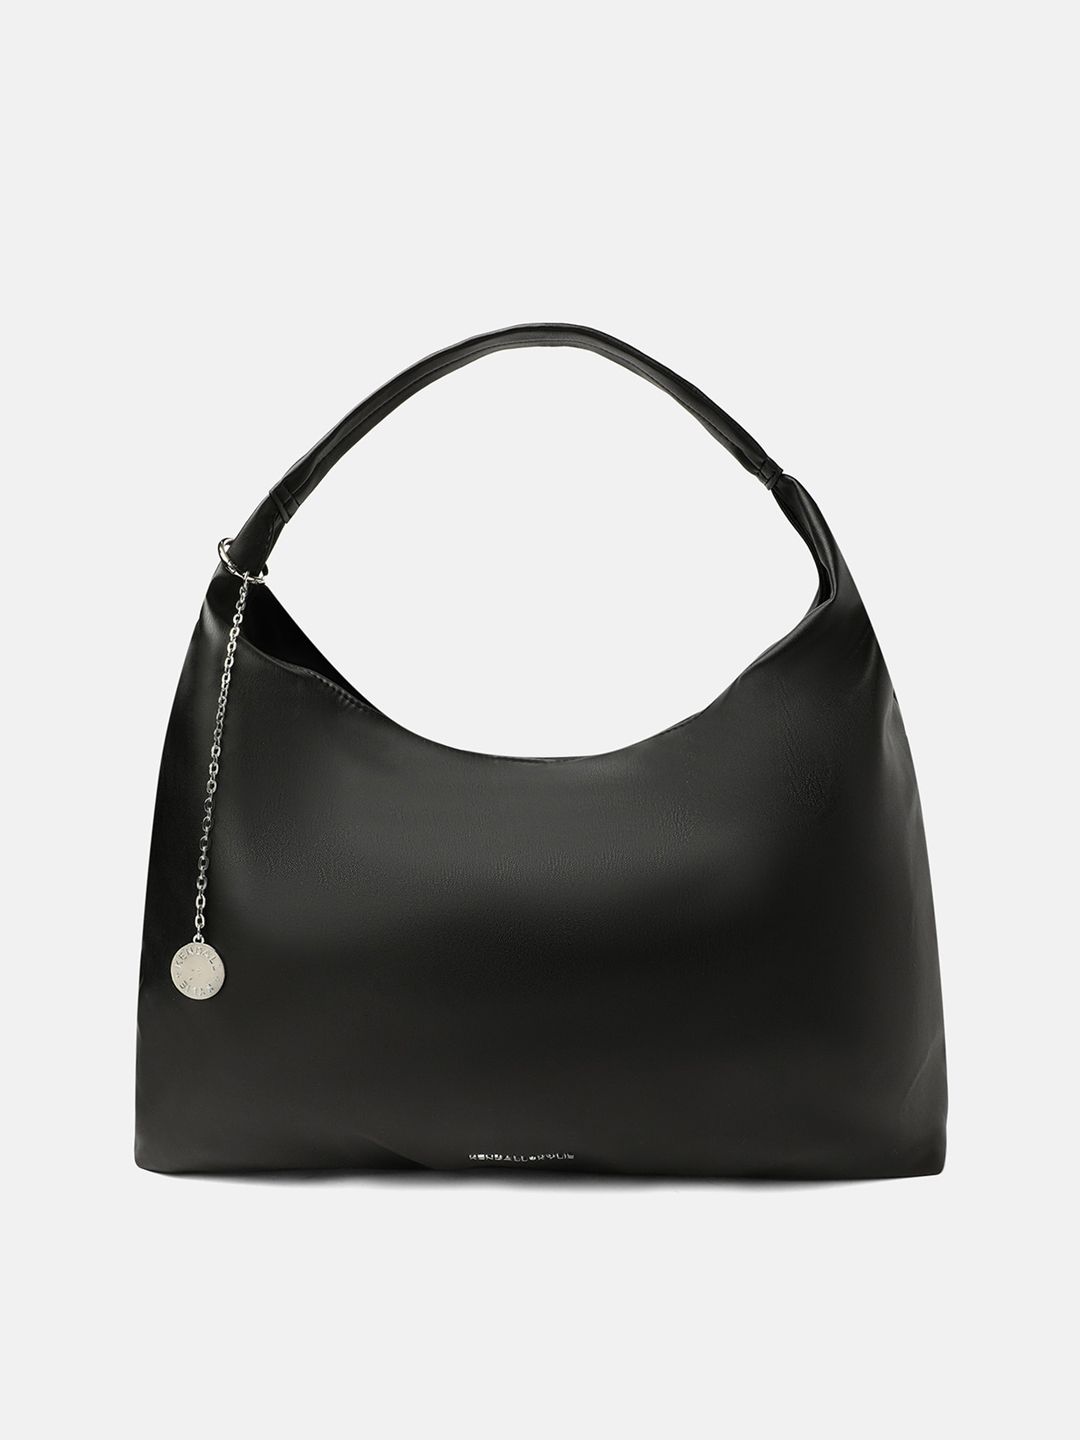 KENDALL & KYLIE Black Oversized Structured Hobo Bag Price in India